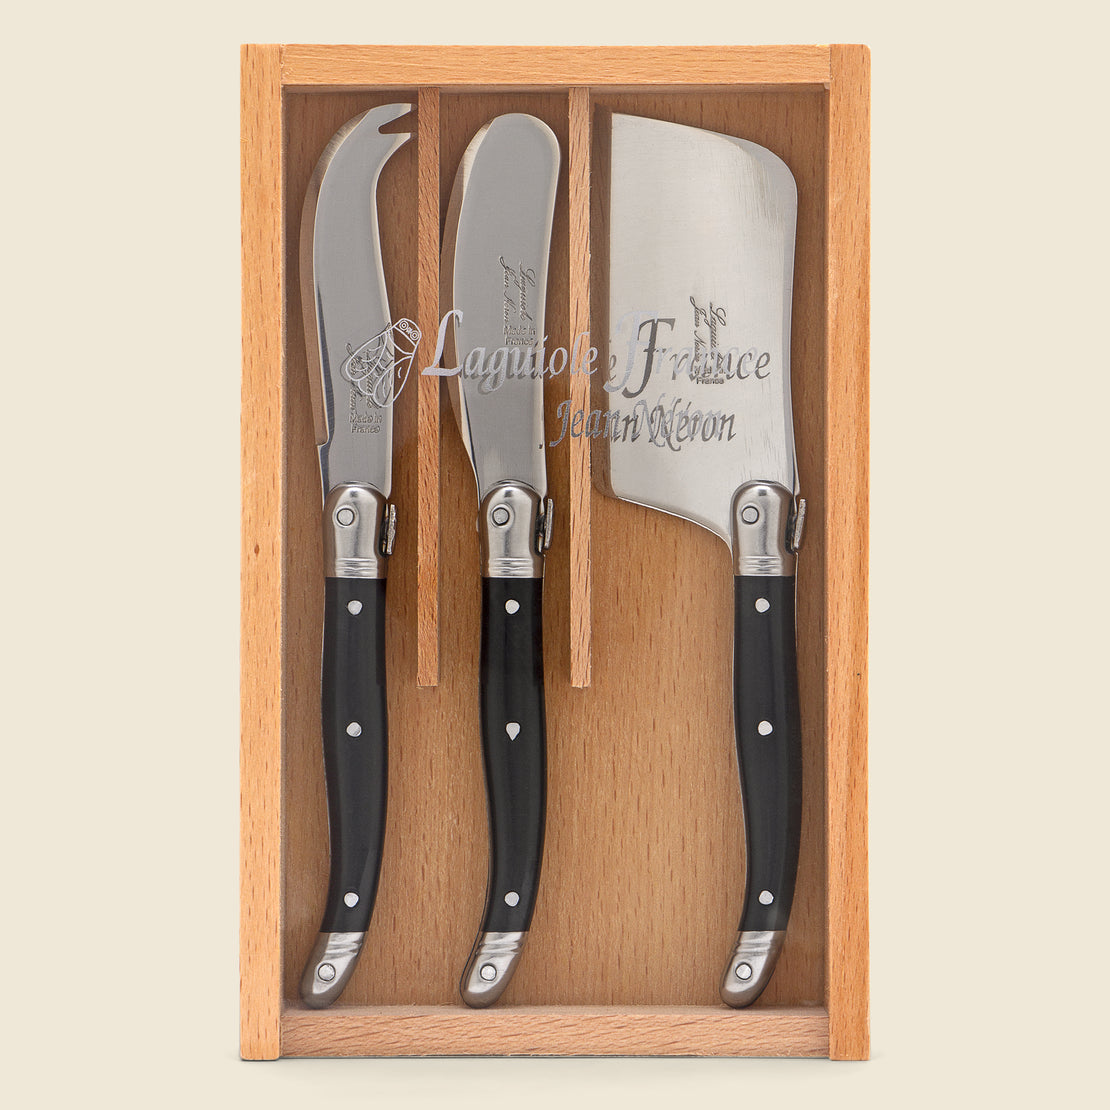 Black Boxed Cheese Set - Home - STAG Provisions - Home - Kitchen - Tabletop